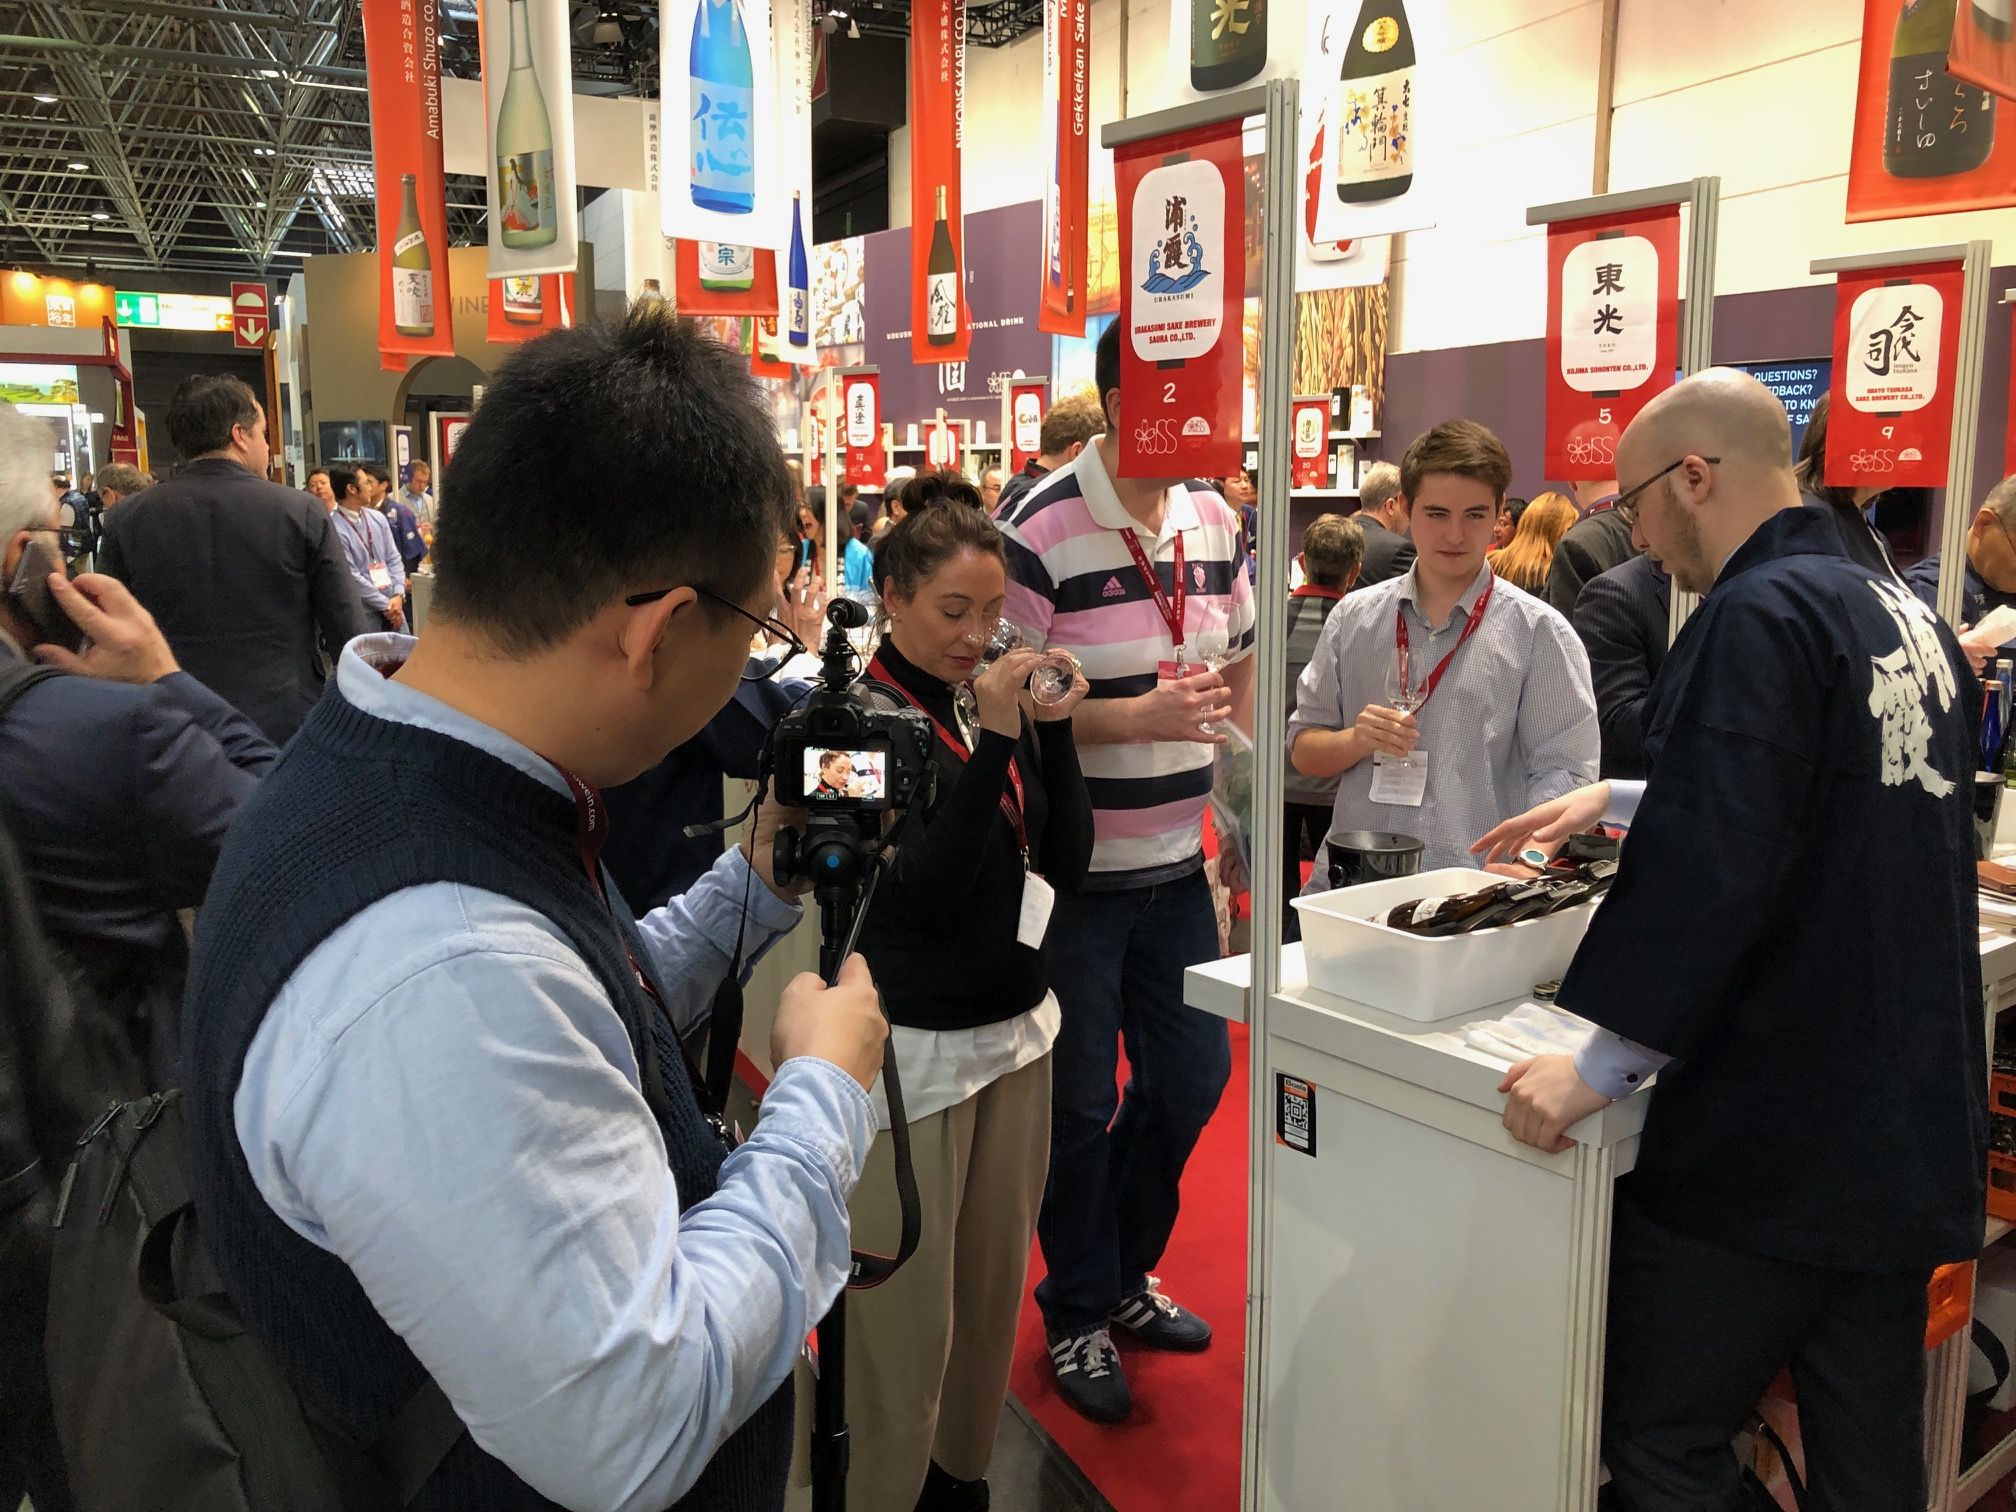 The key global trends and buyer insights from ProWein 2019